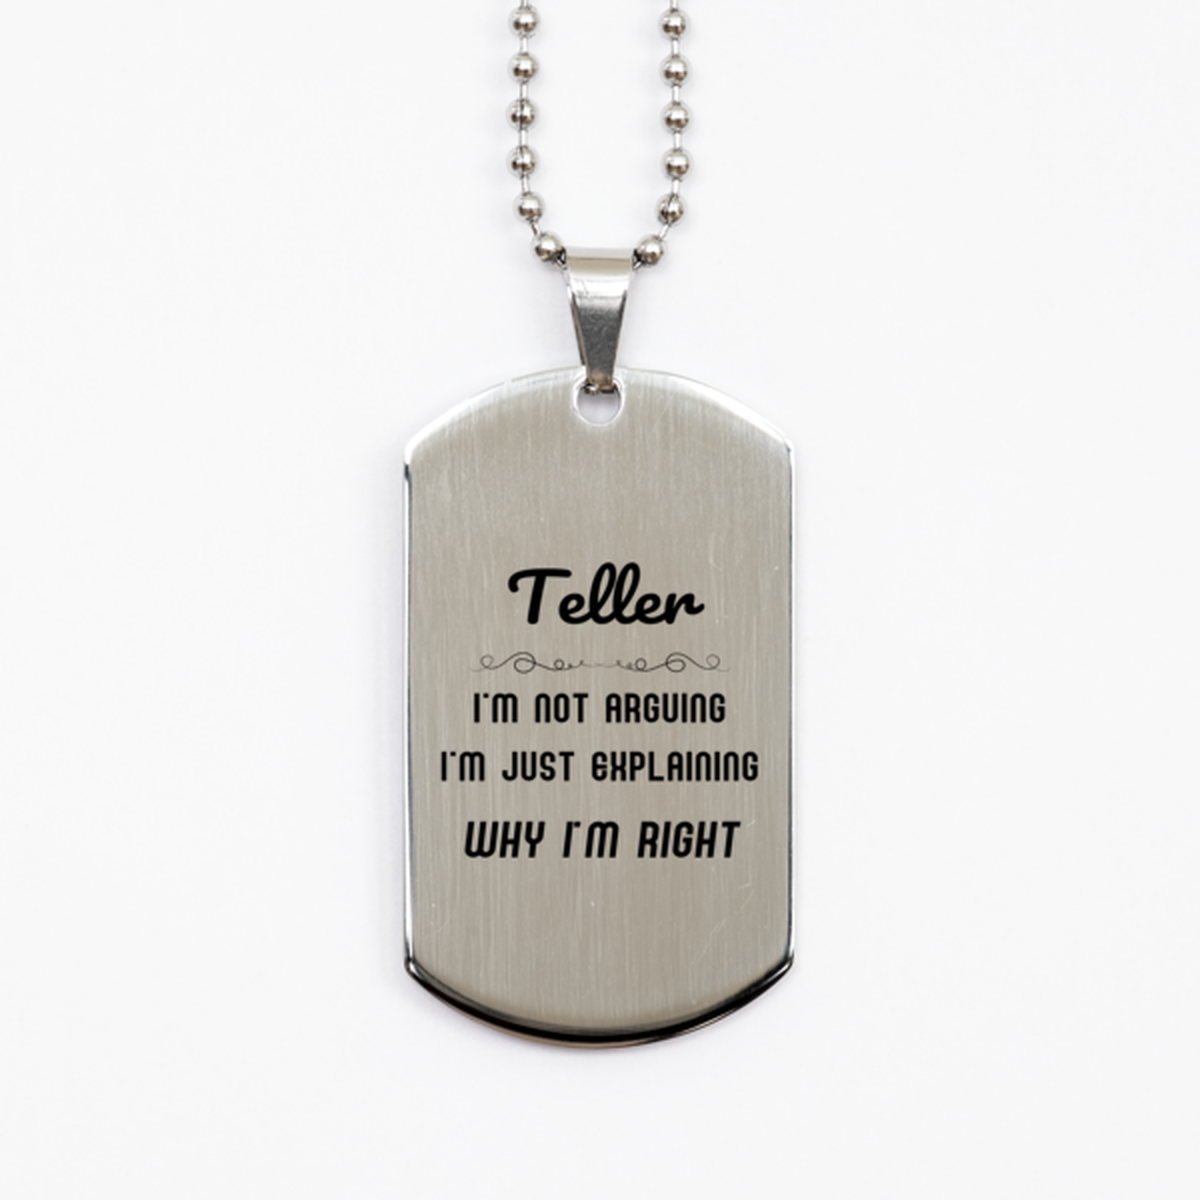 Teller I'm not Arguing. I'm Just Explaining Why I'm RIGHT Silver Dog Tag, Funny Saying Quote Teller Gifts For Teller Graduation Birthday Christmas Gifts for Men Women Coworker